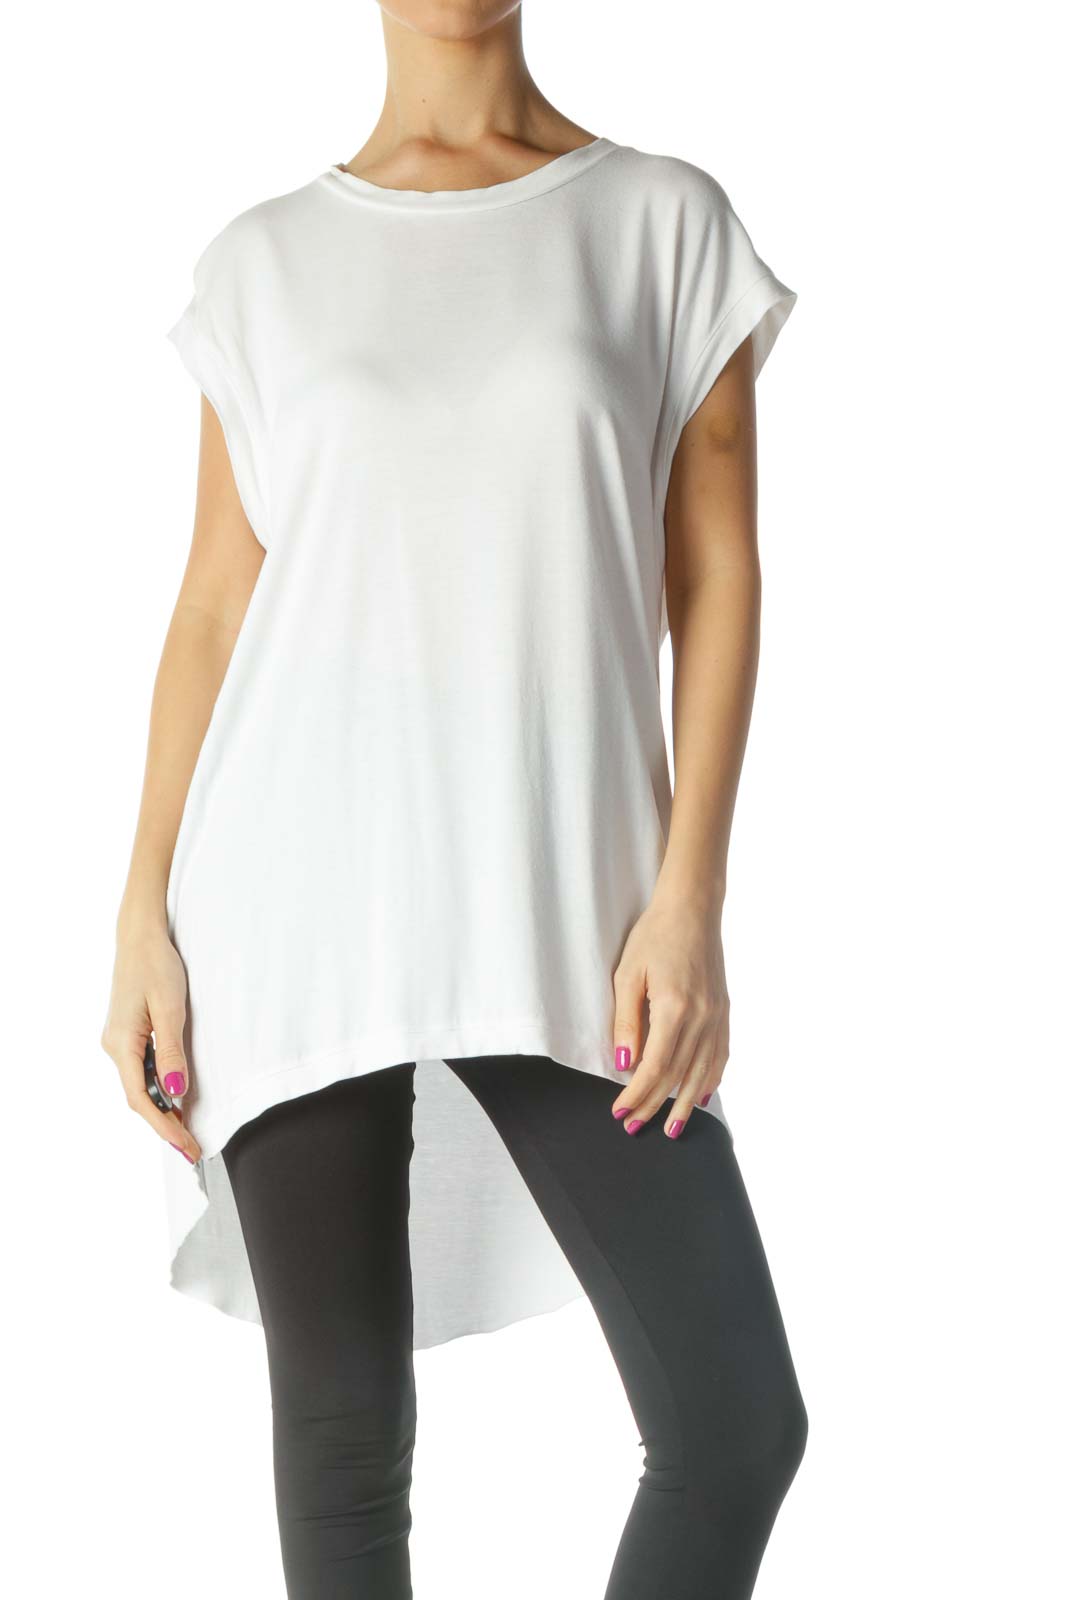 White Solid Casual T-Shirt Front